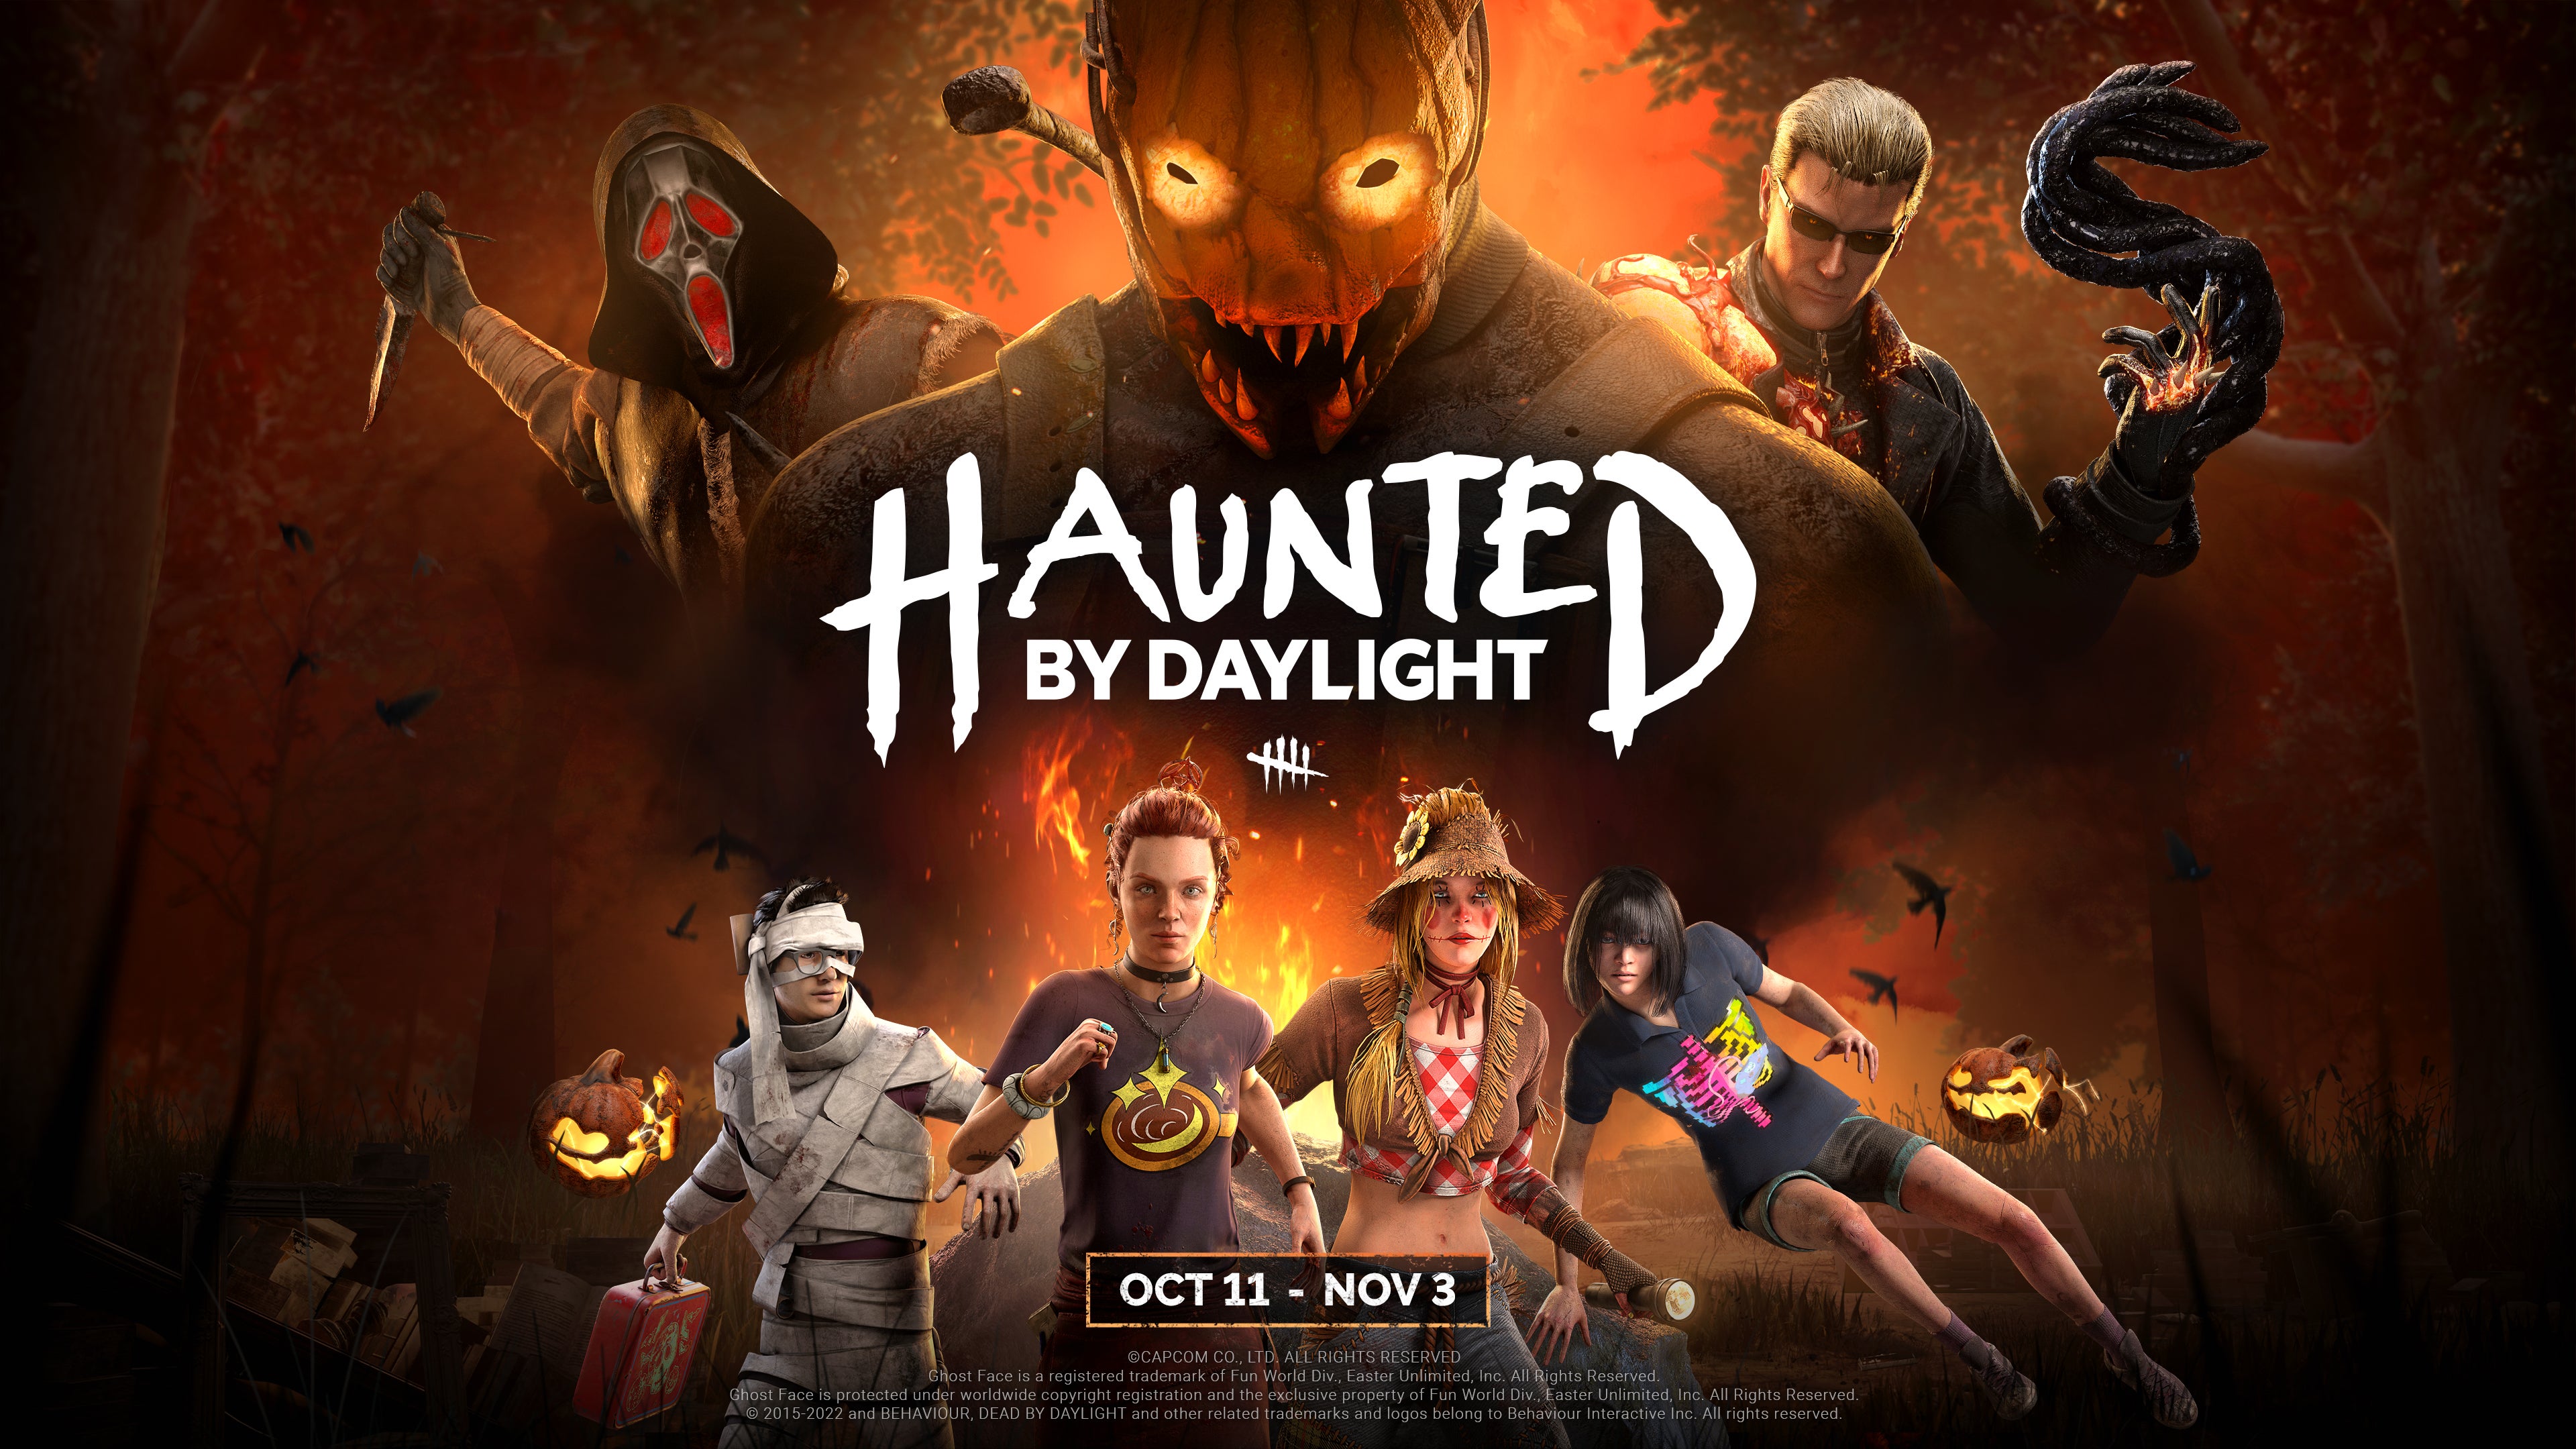 key art for Haunted by Daylight Halloween event